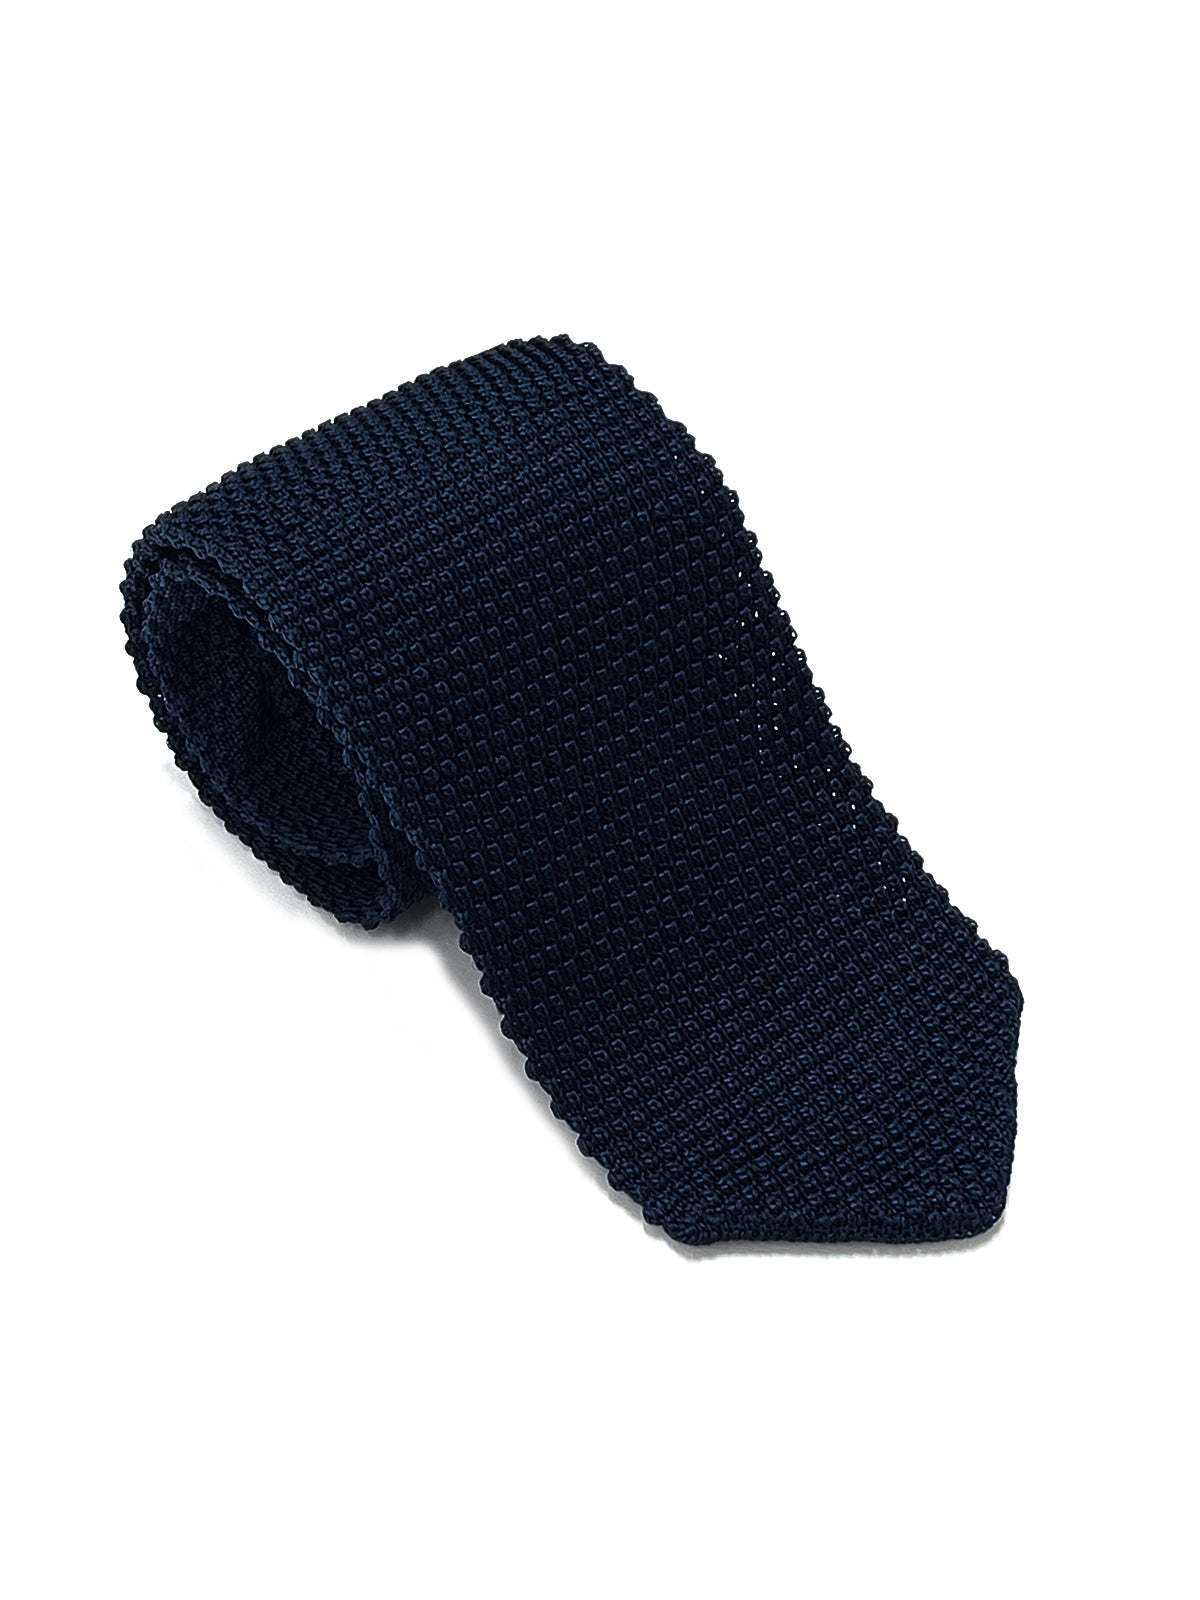 French Navy Knitted Silk Tie